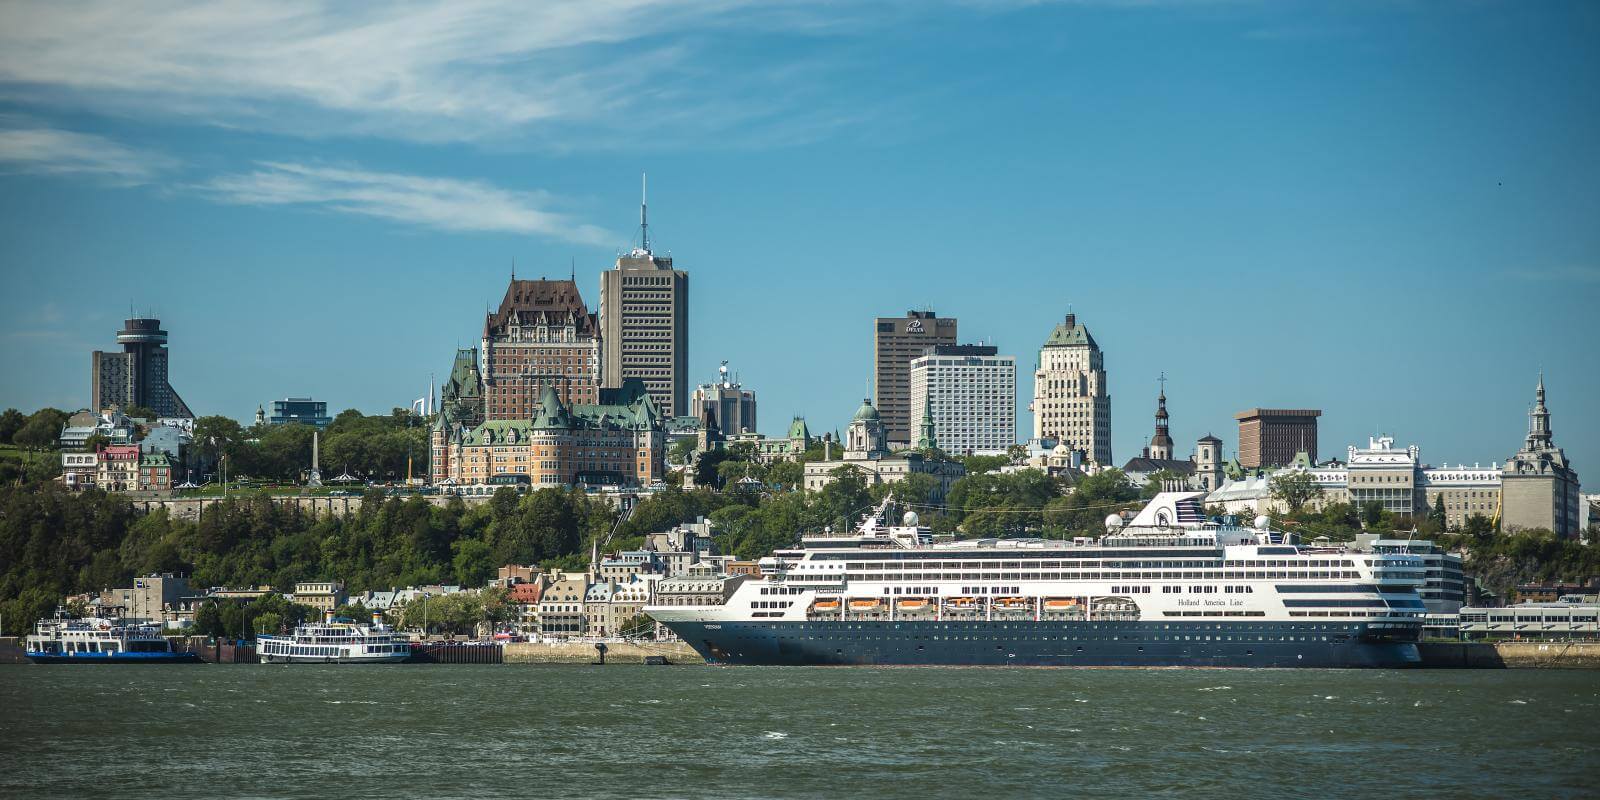 Cruise Ship in front of Old Québec